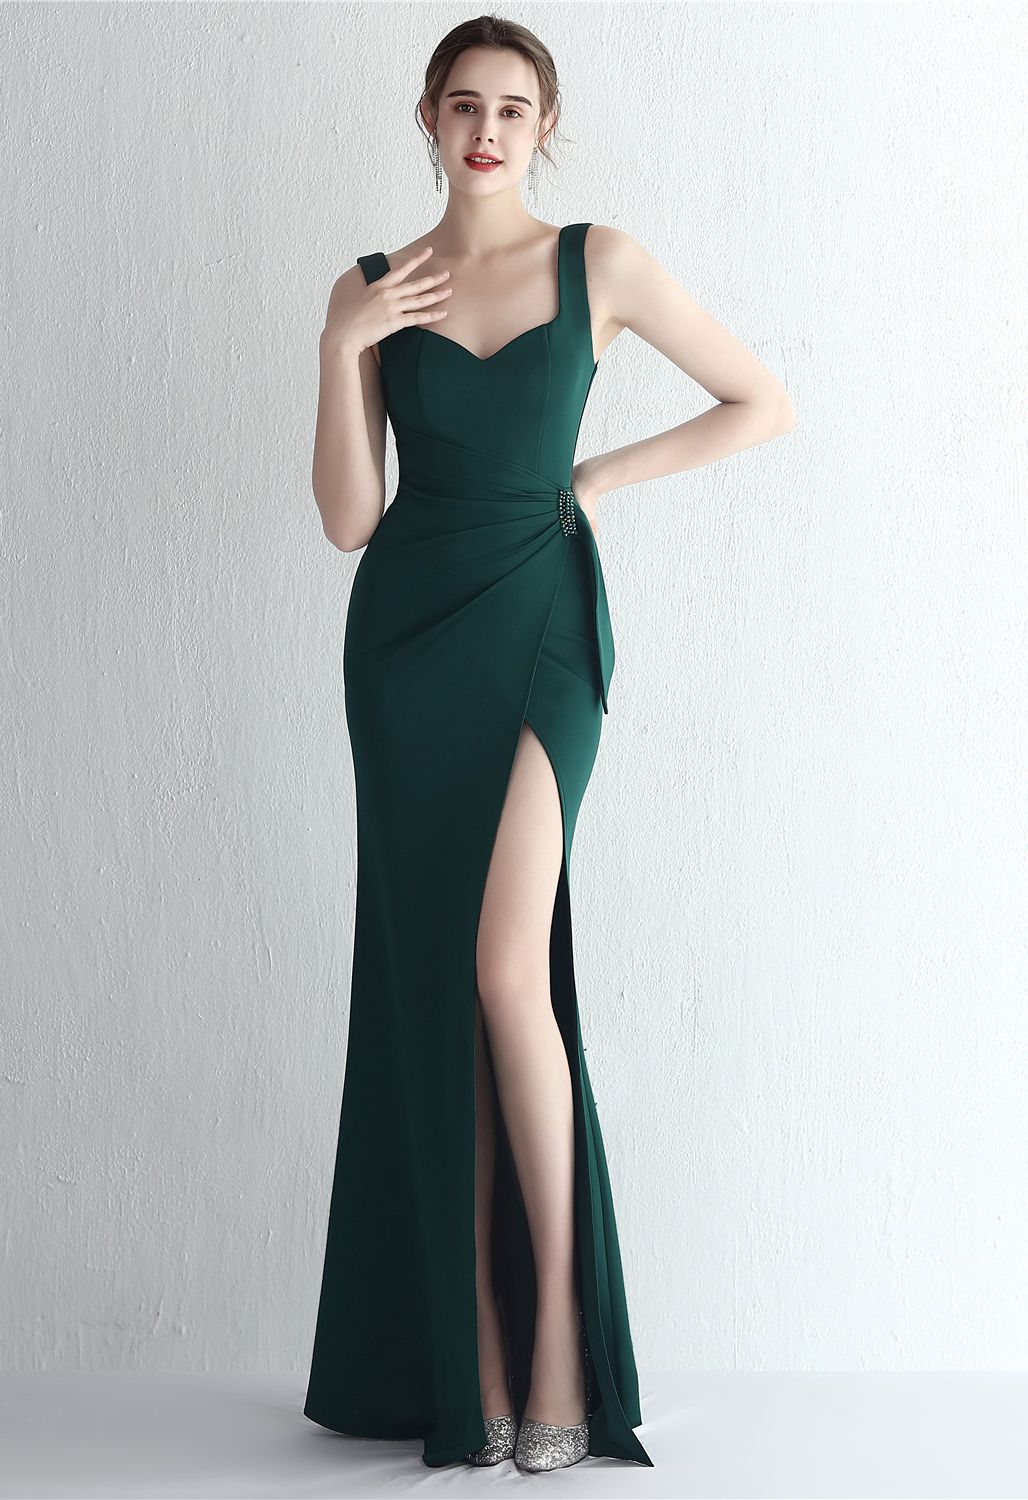 Ruched Waist High Slit Gown in Emerald